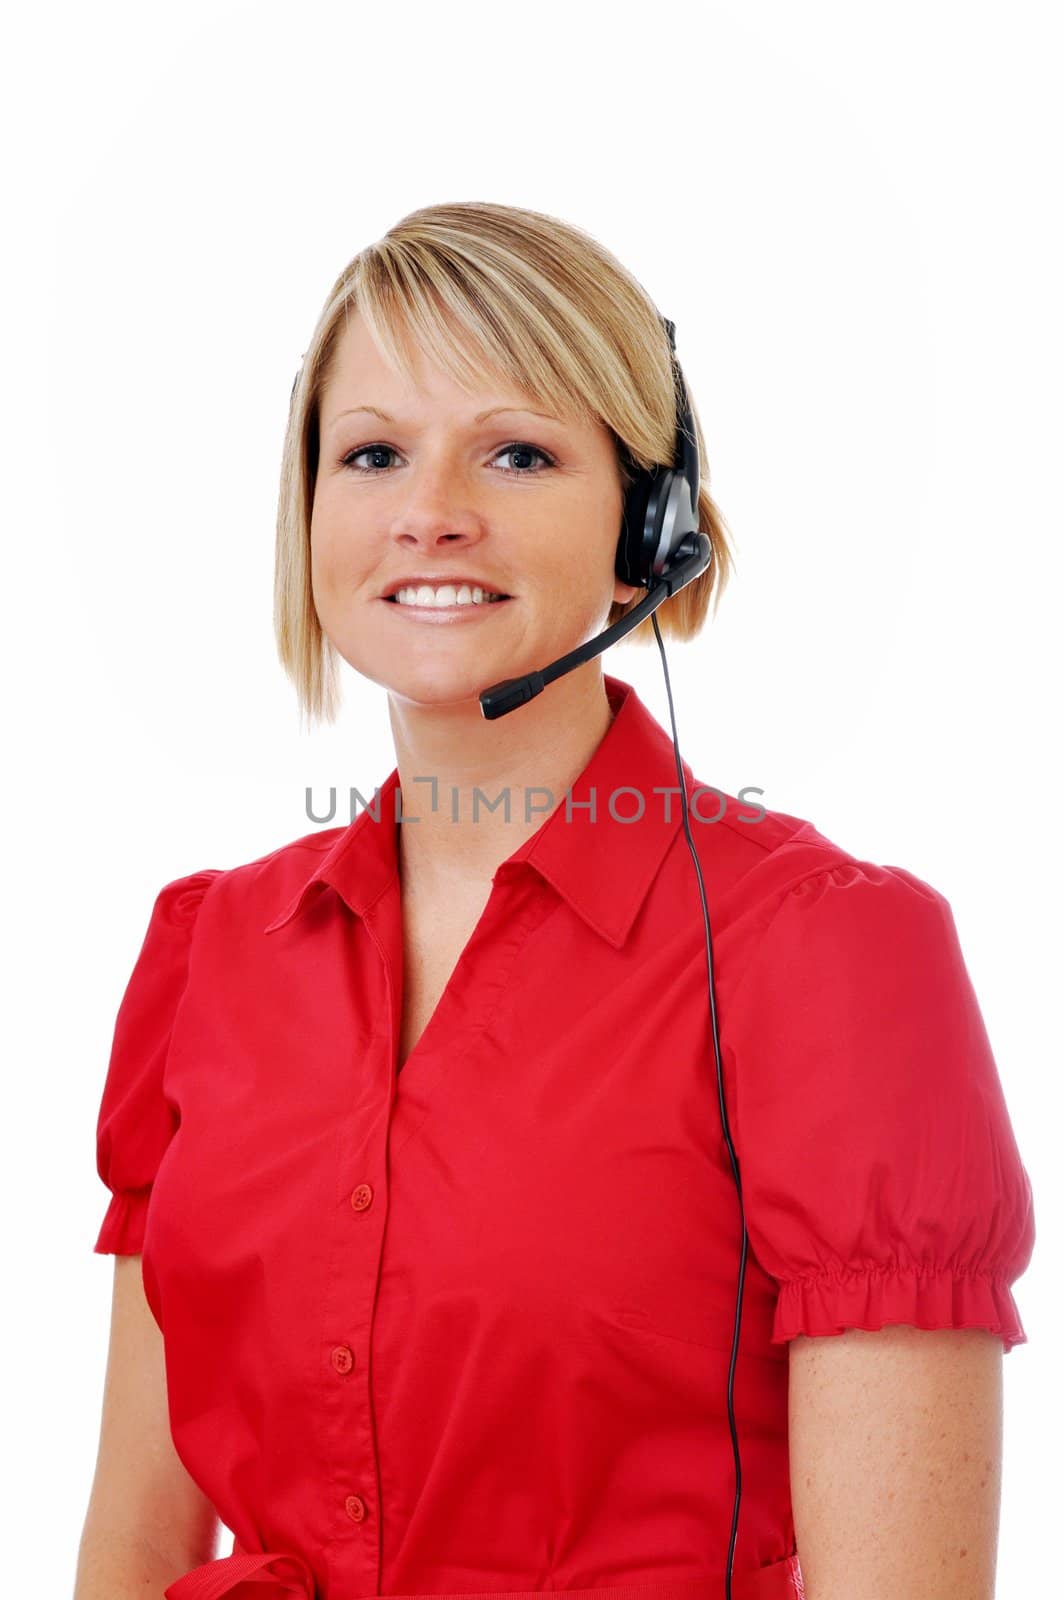 Female Customer Service Representative with Headset by dehooks